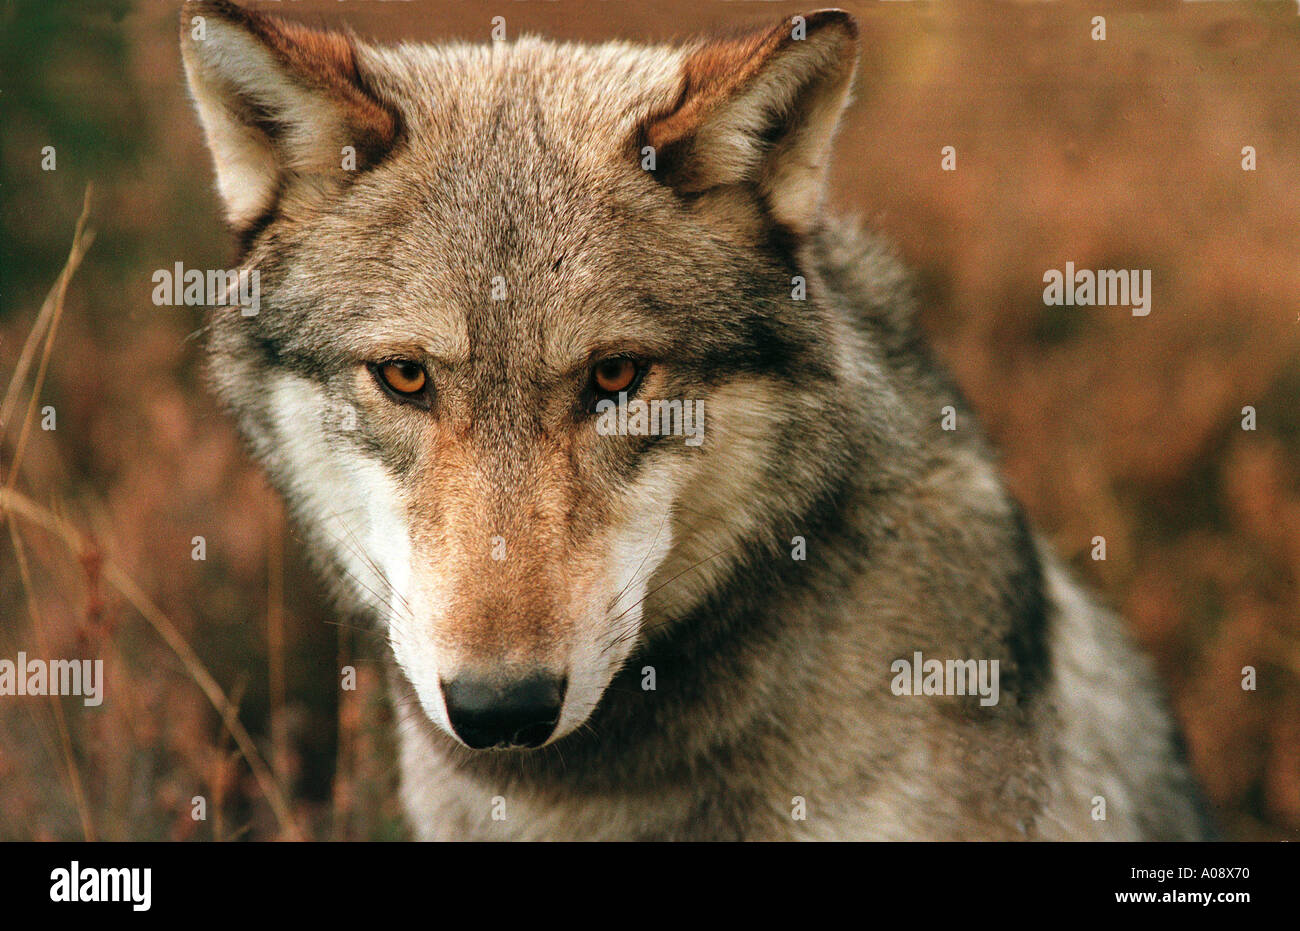 Timber wolf, full face view Stock Photo